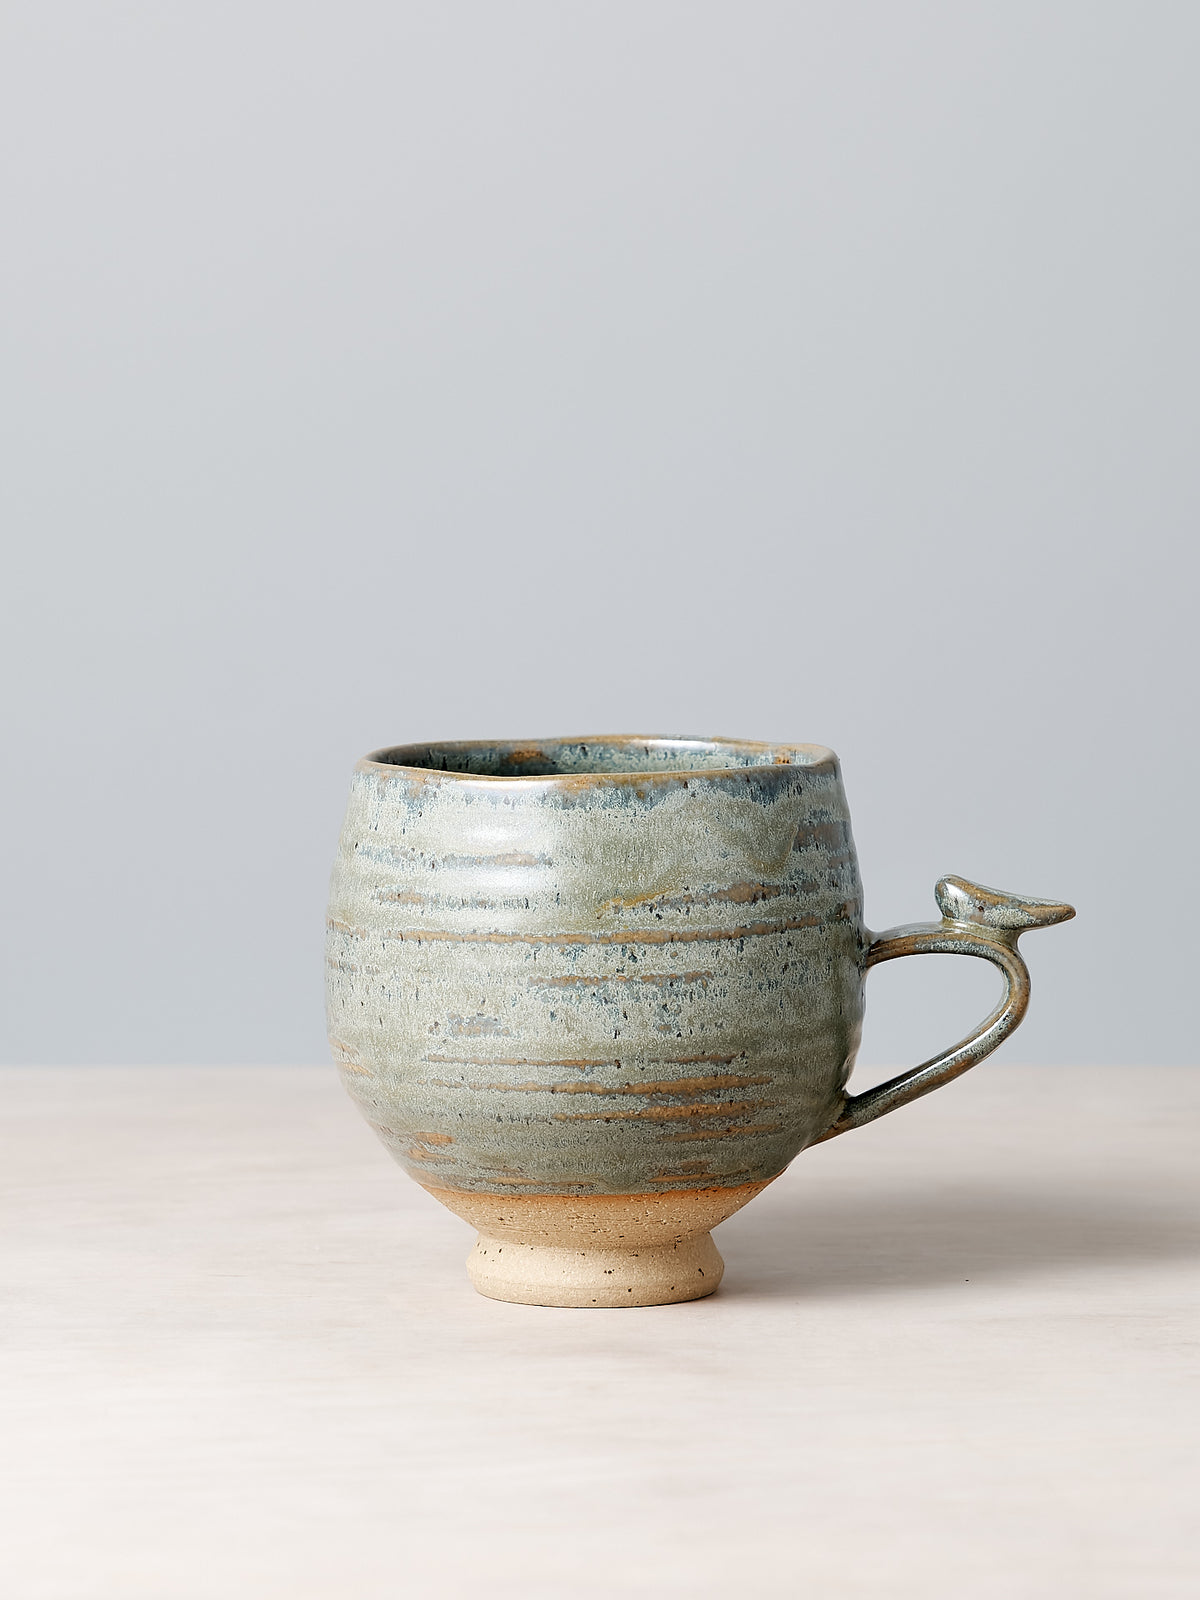 A small Bird Handle Cup – Green Tea from Jino Ceramic Studio, with a bird on it, sitting on a table.